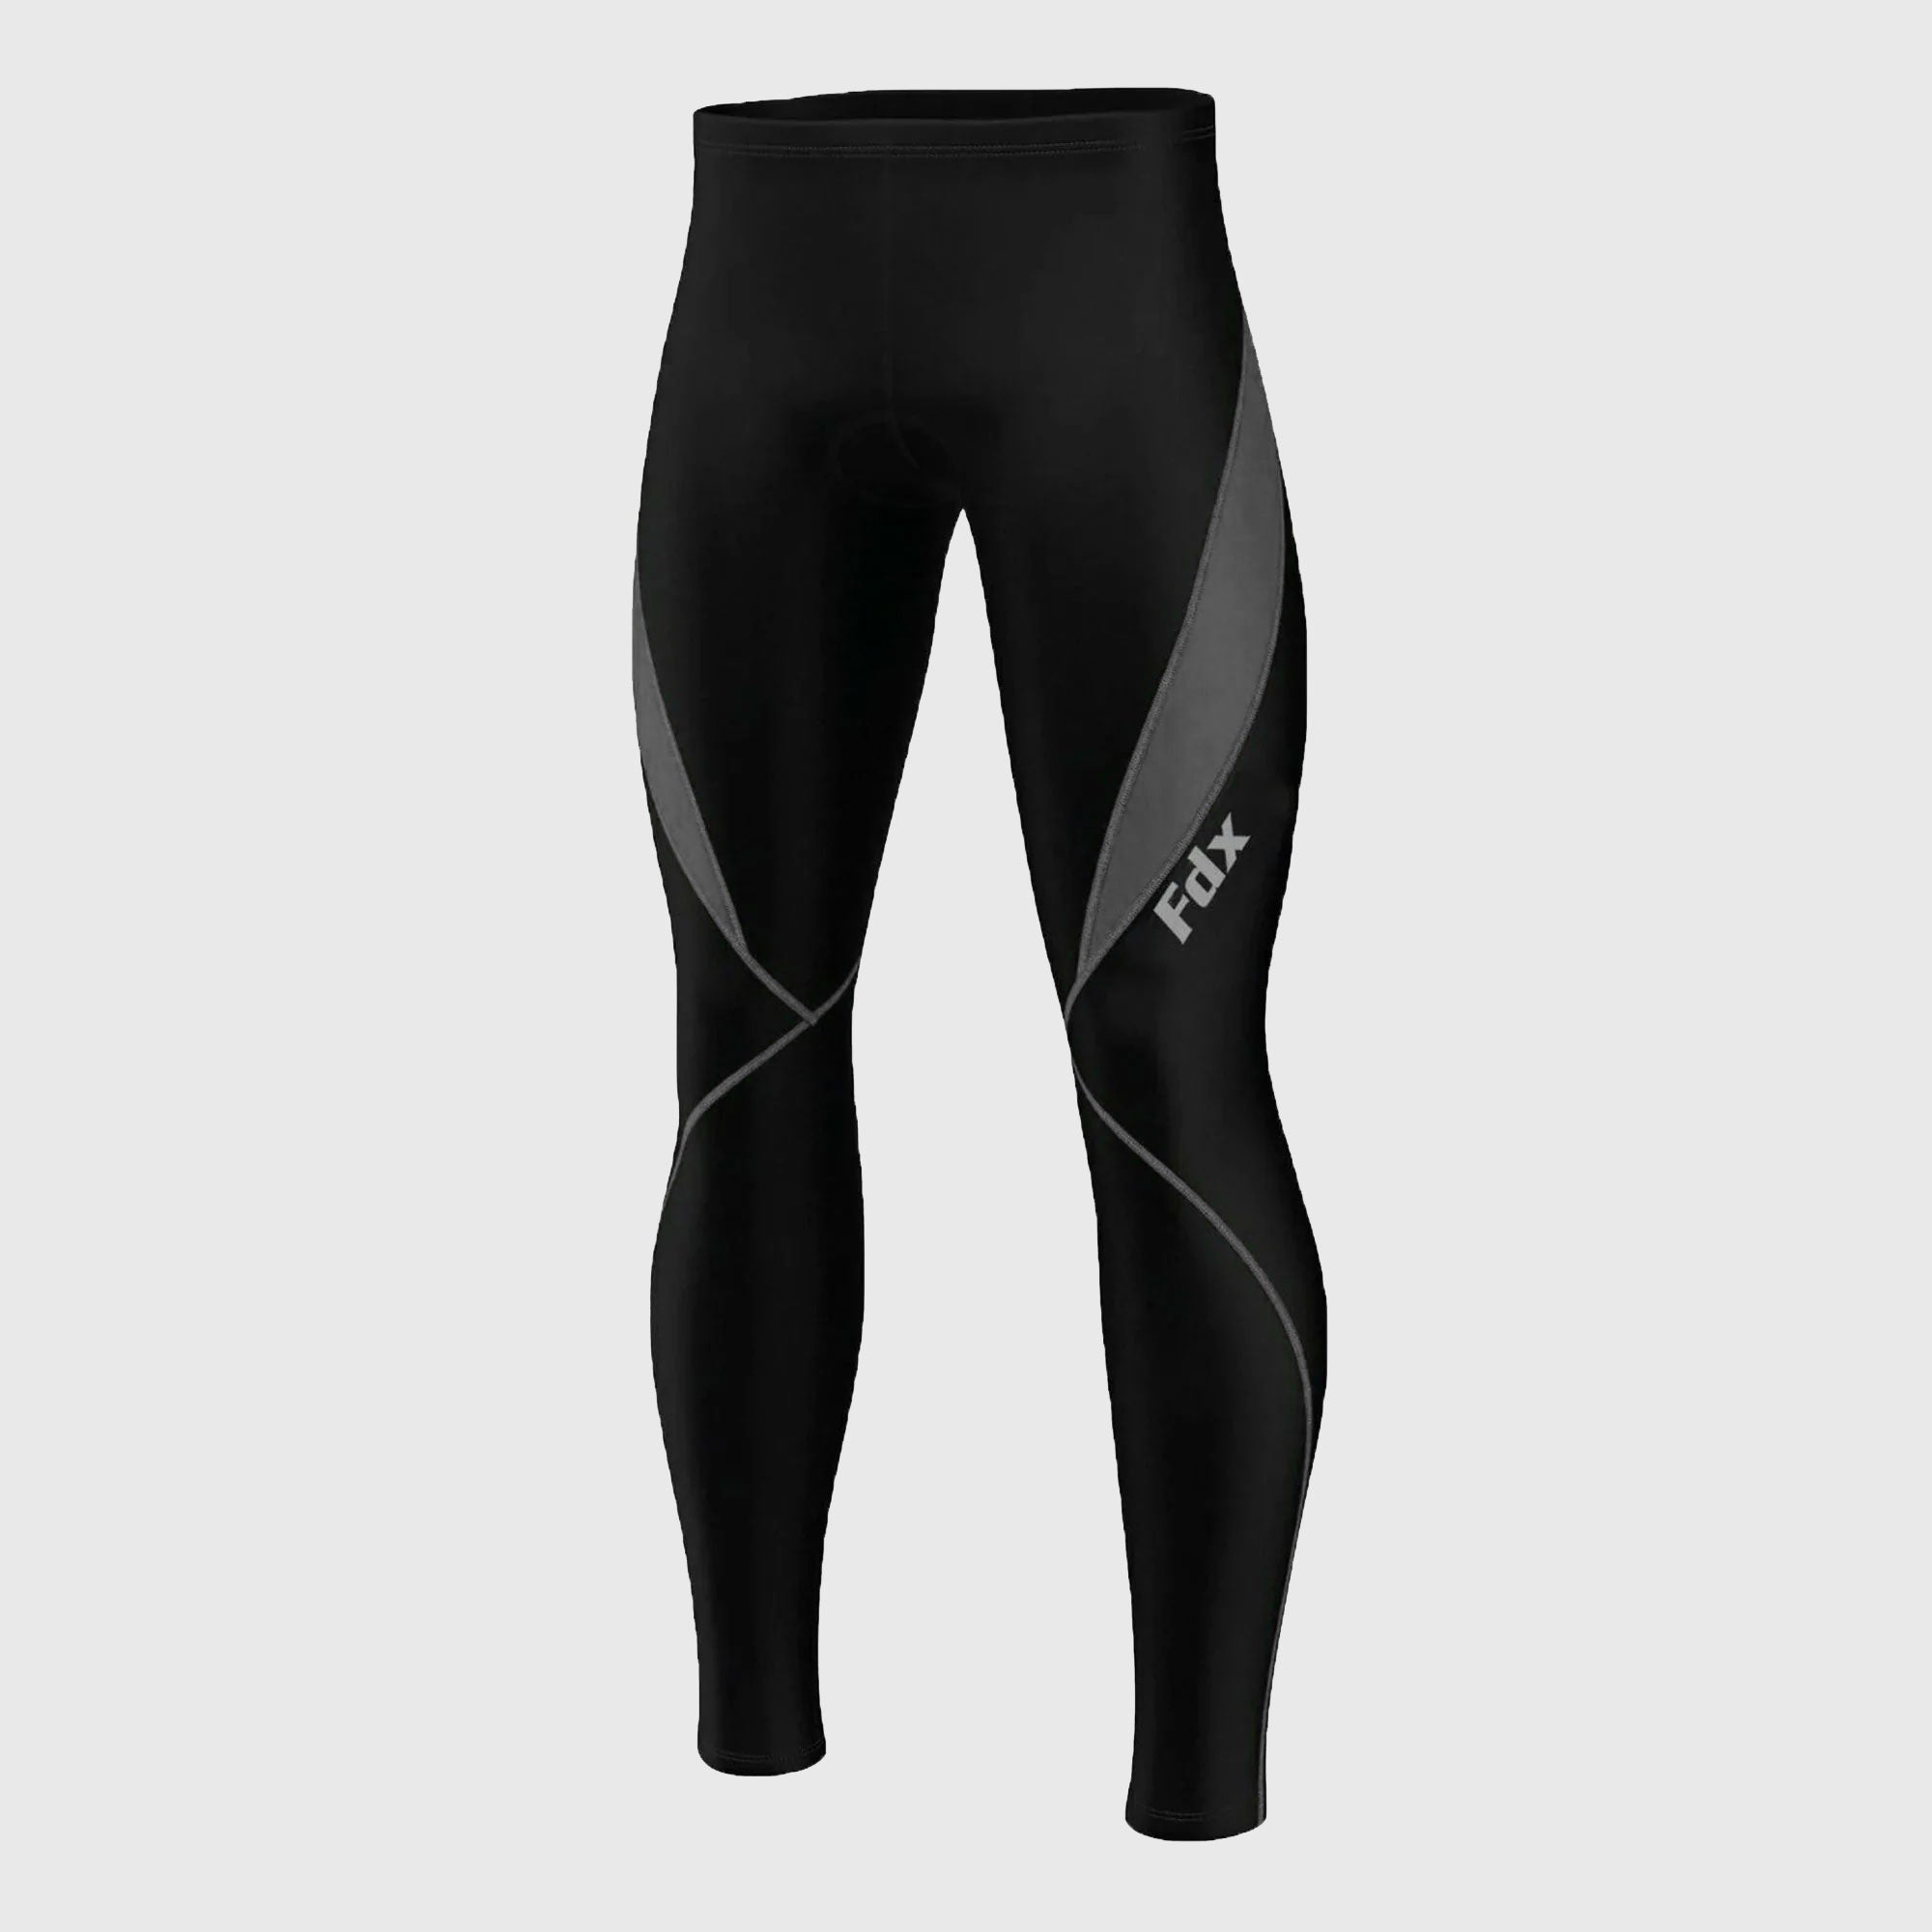 NEW Skins Men's Cycle Pro Compression Chamois Tights Black